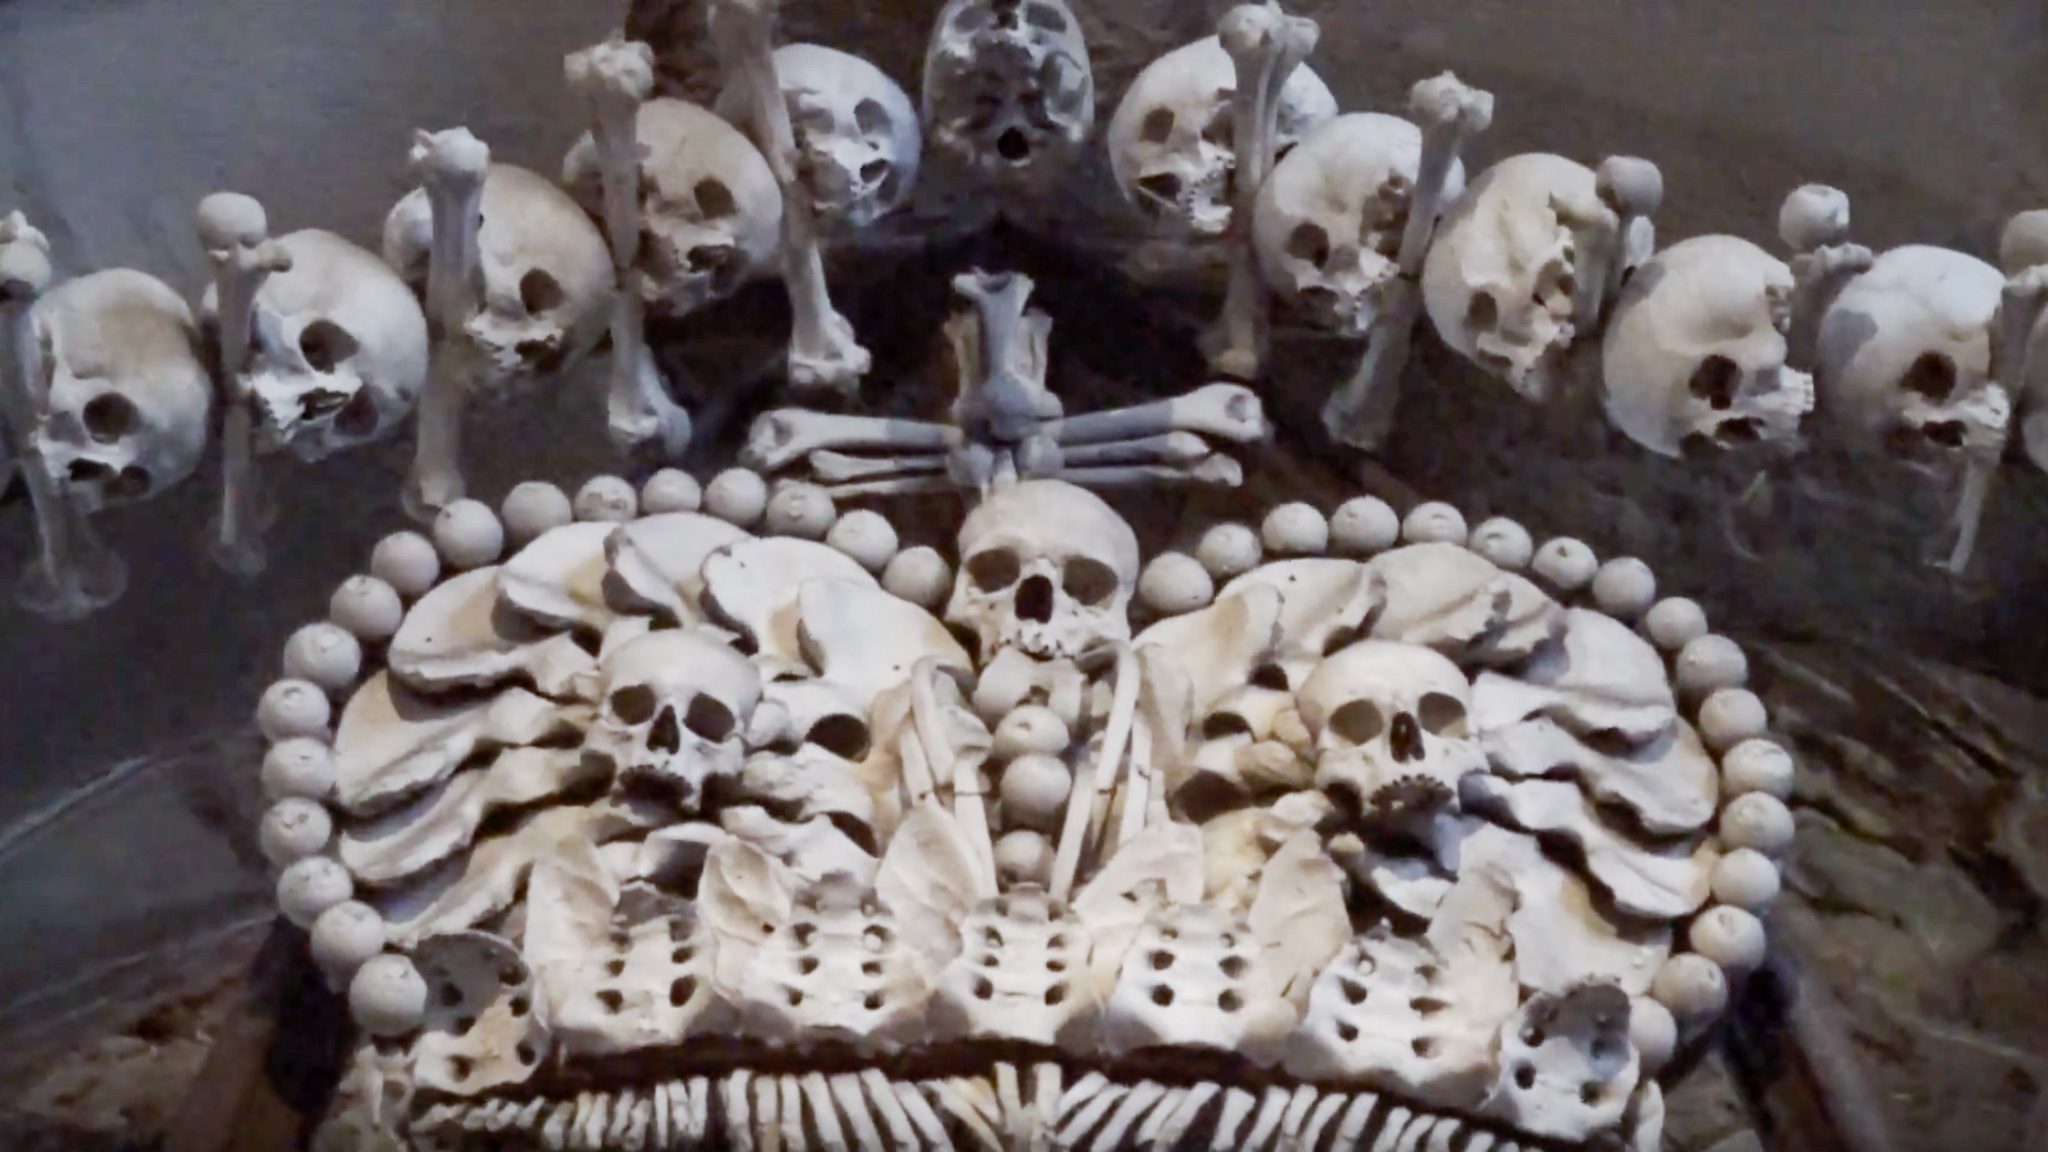 WATCH: This church is made of real human bones